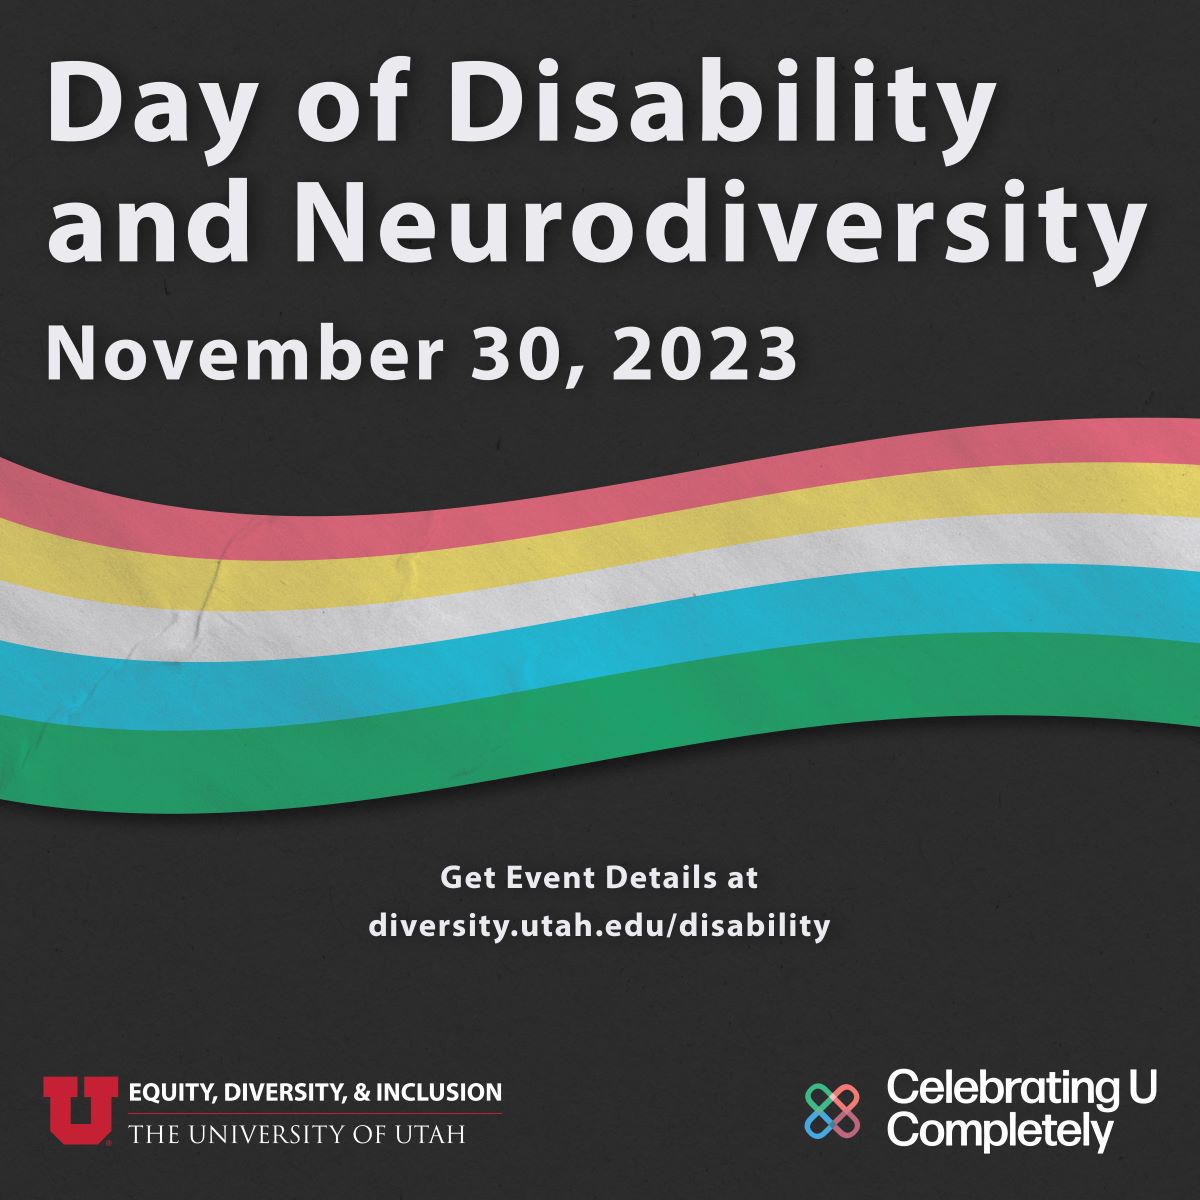 Day of Disability and Neurodiversity